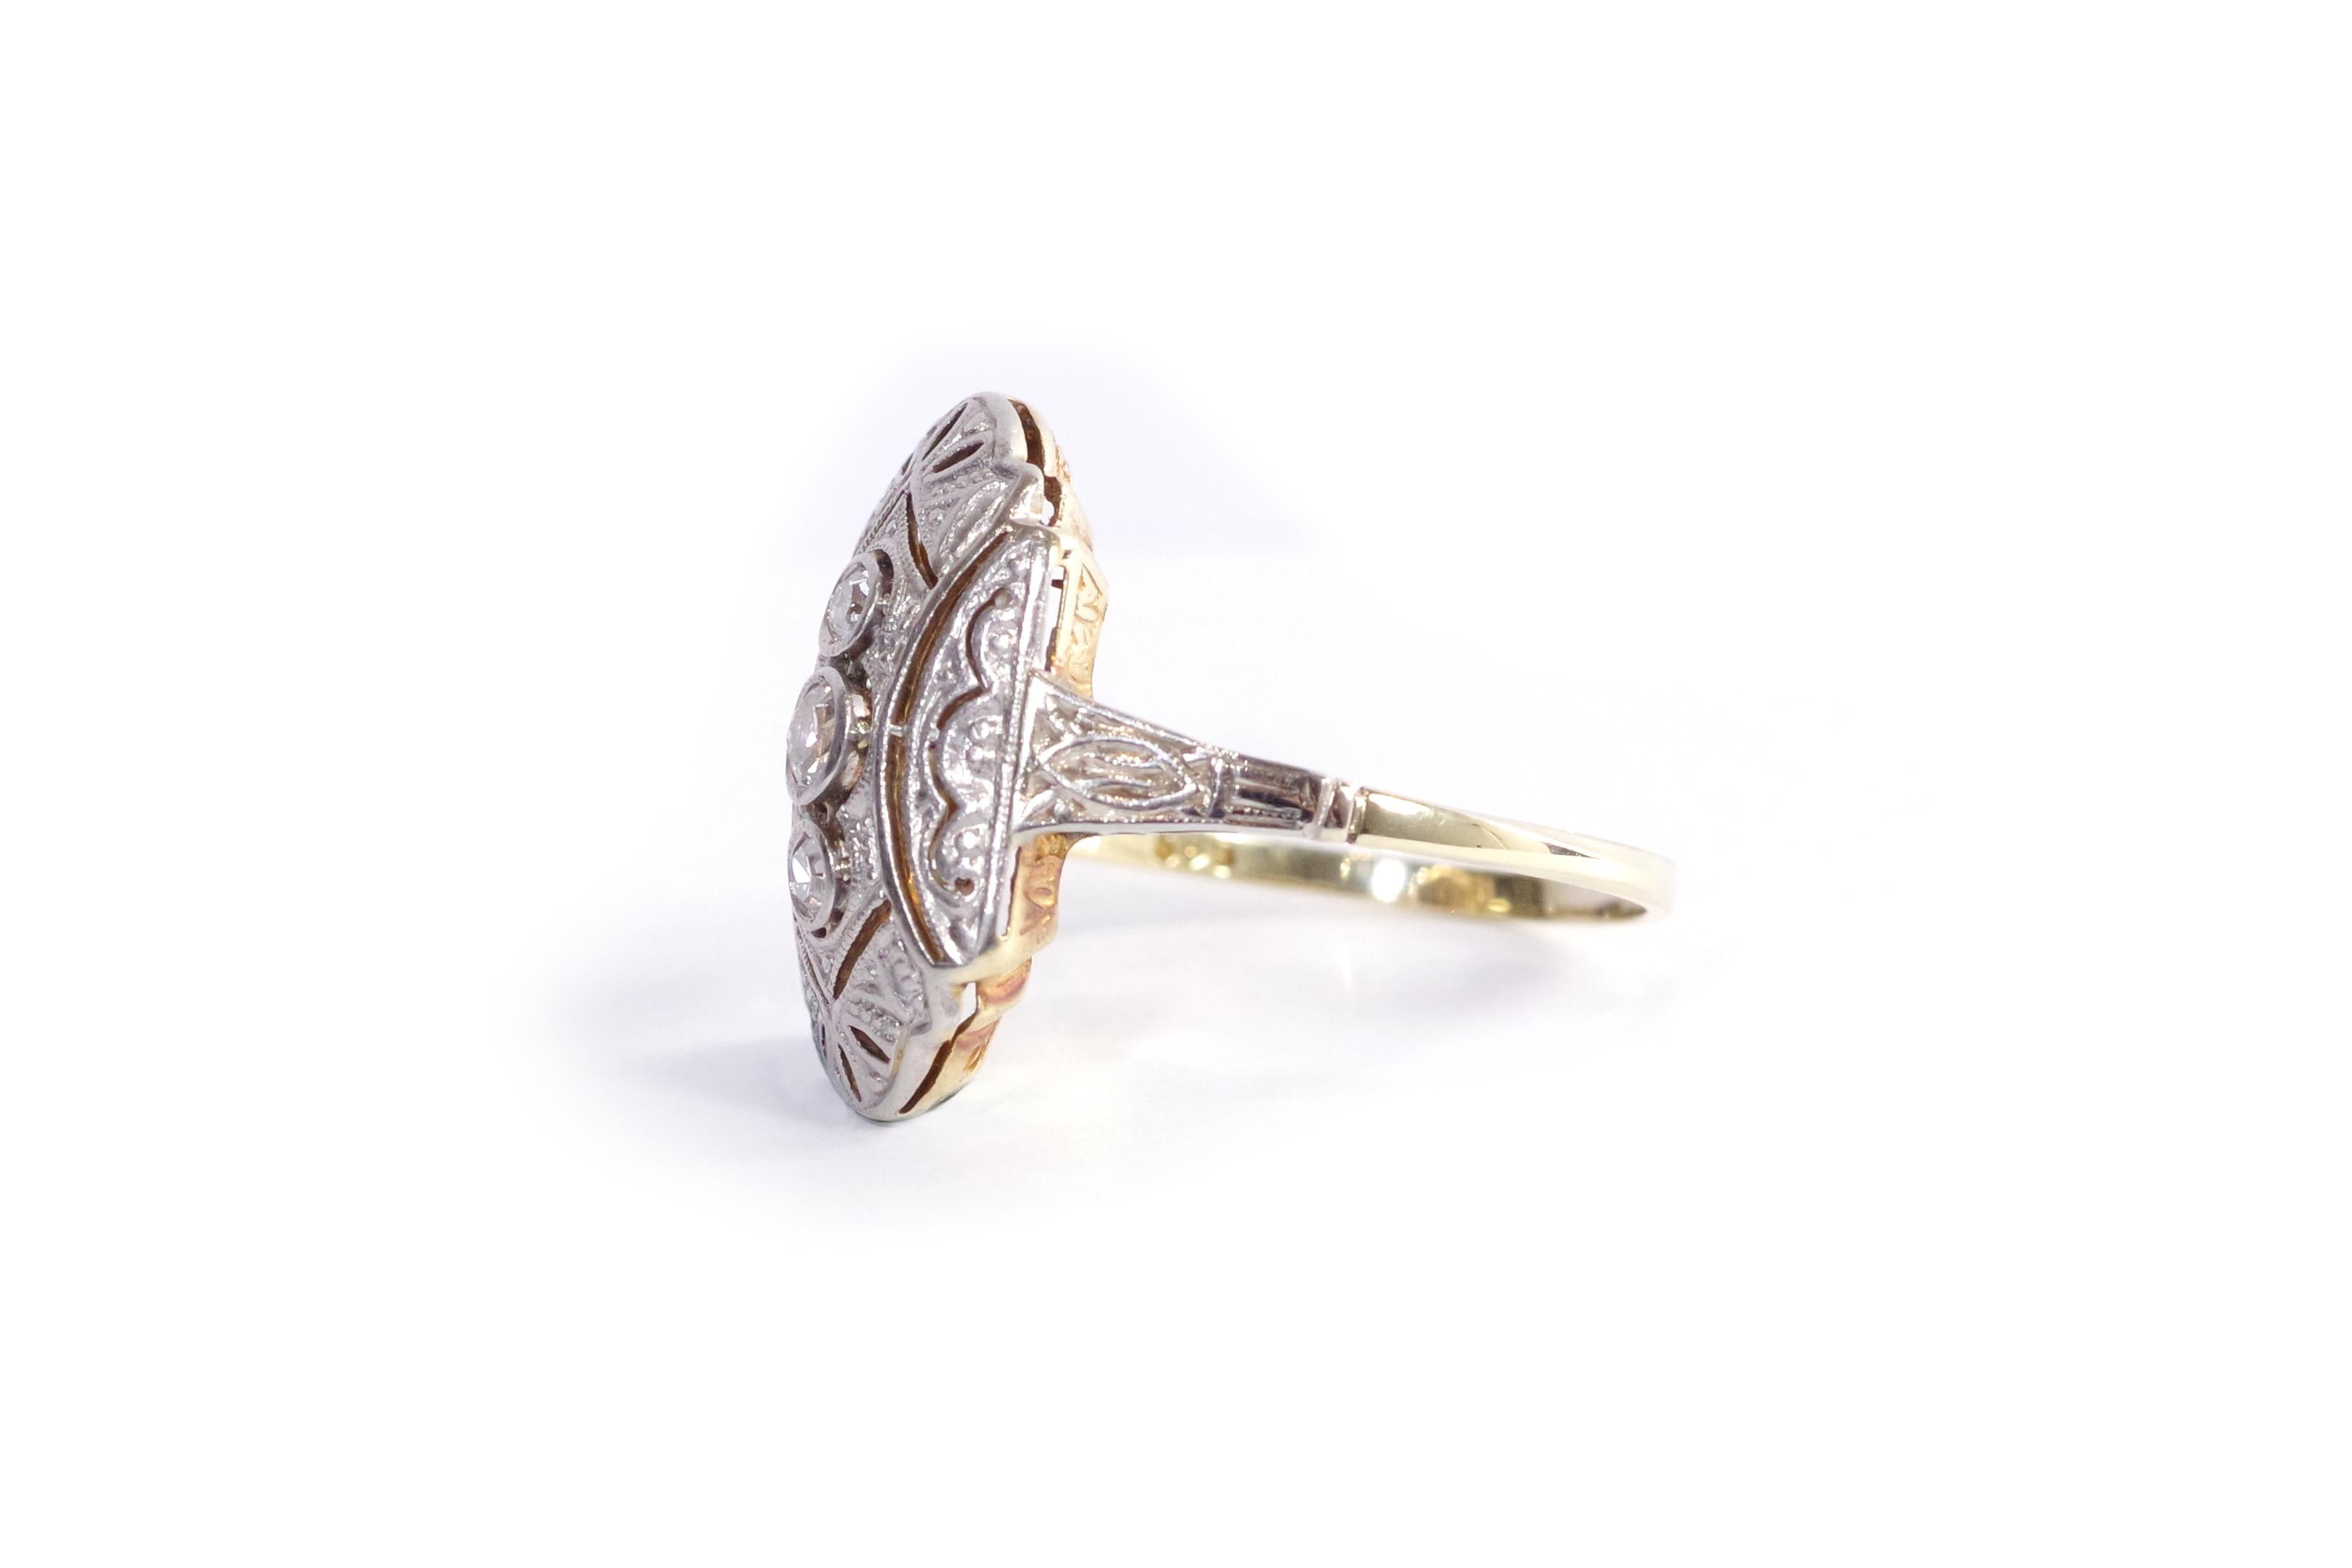 Art Deco diamond ring in 14-karat gold and platinum. Hexagonal Art Deco ring set with three old mine cut diamonds in a bezel setting. The ring is elegantly decorated with geometric lines and openwork motifs, typical of the Art Deco period. Antique